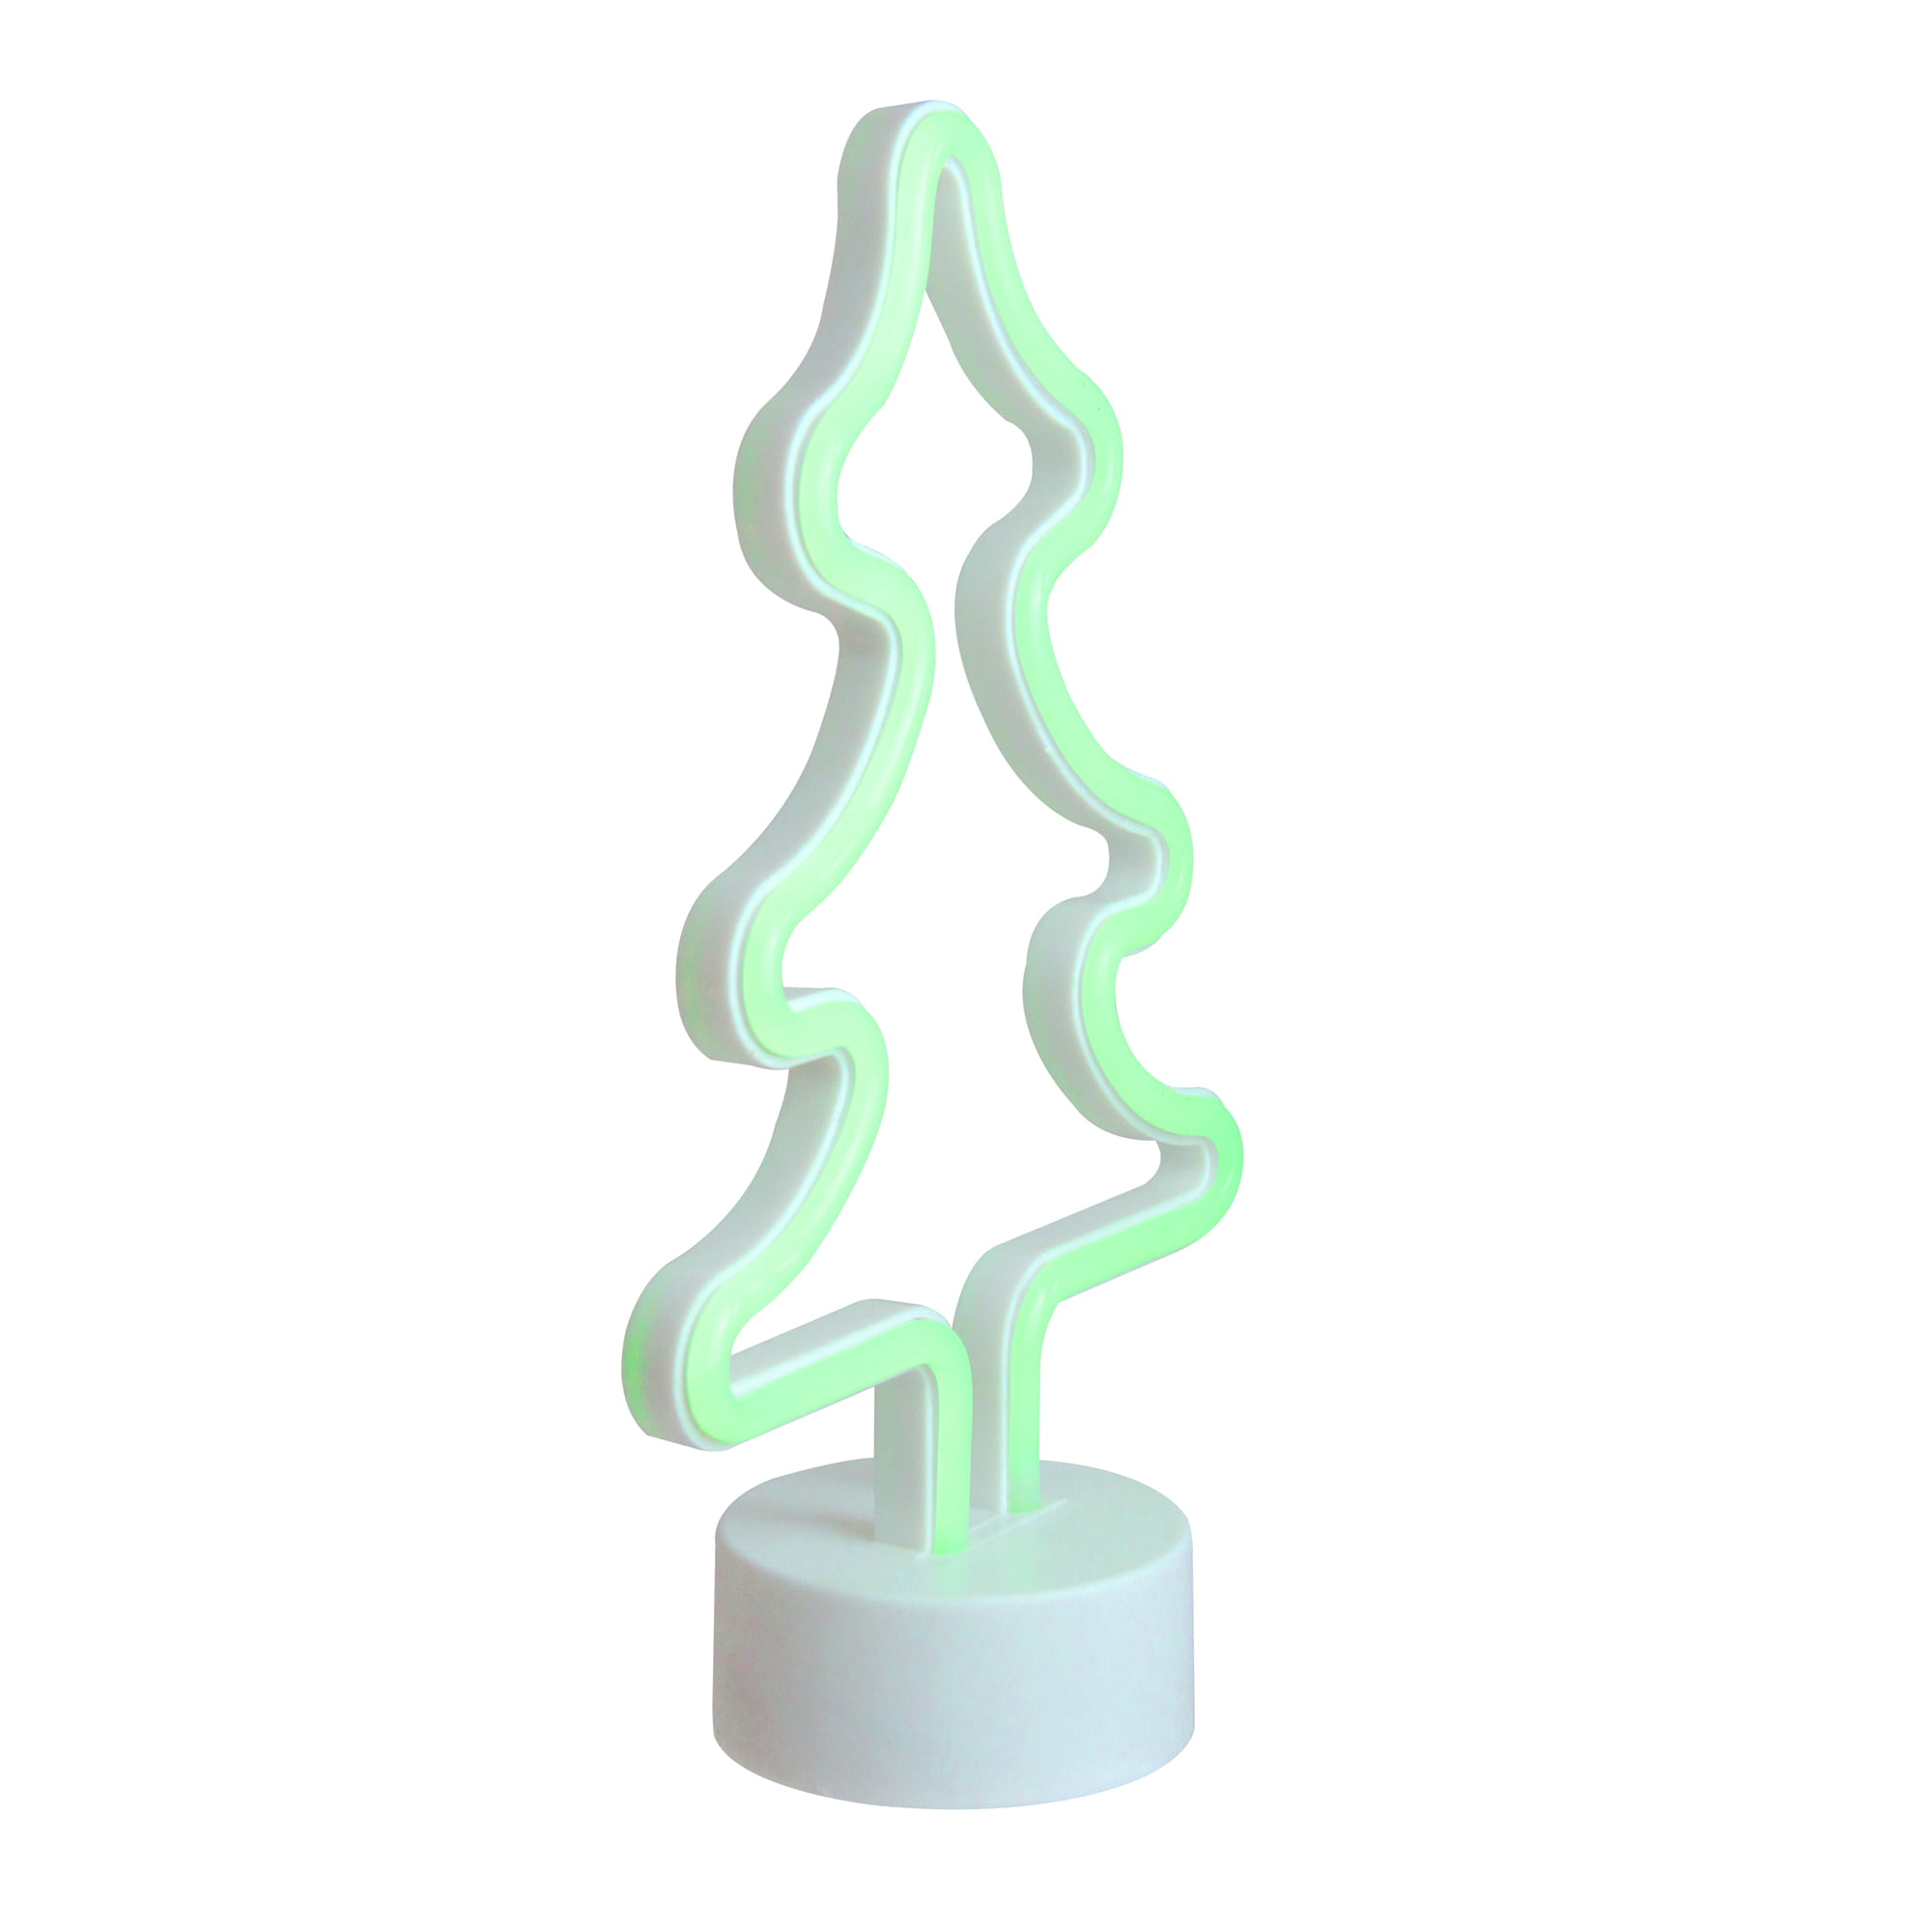 Christmas tree and lights Portable Battery Charger by Nir Roitman